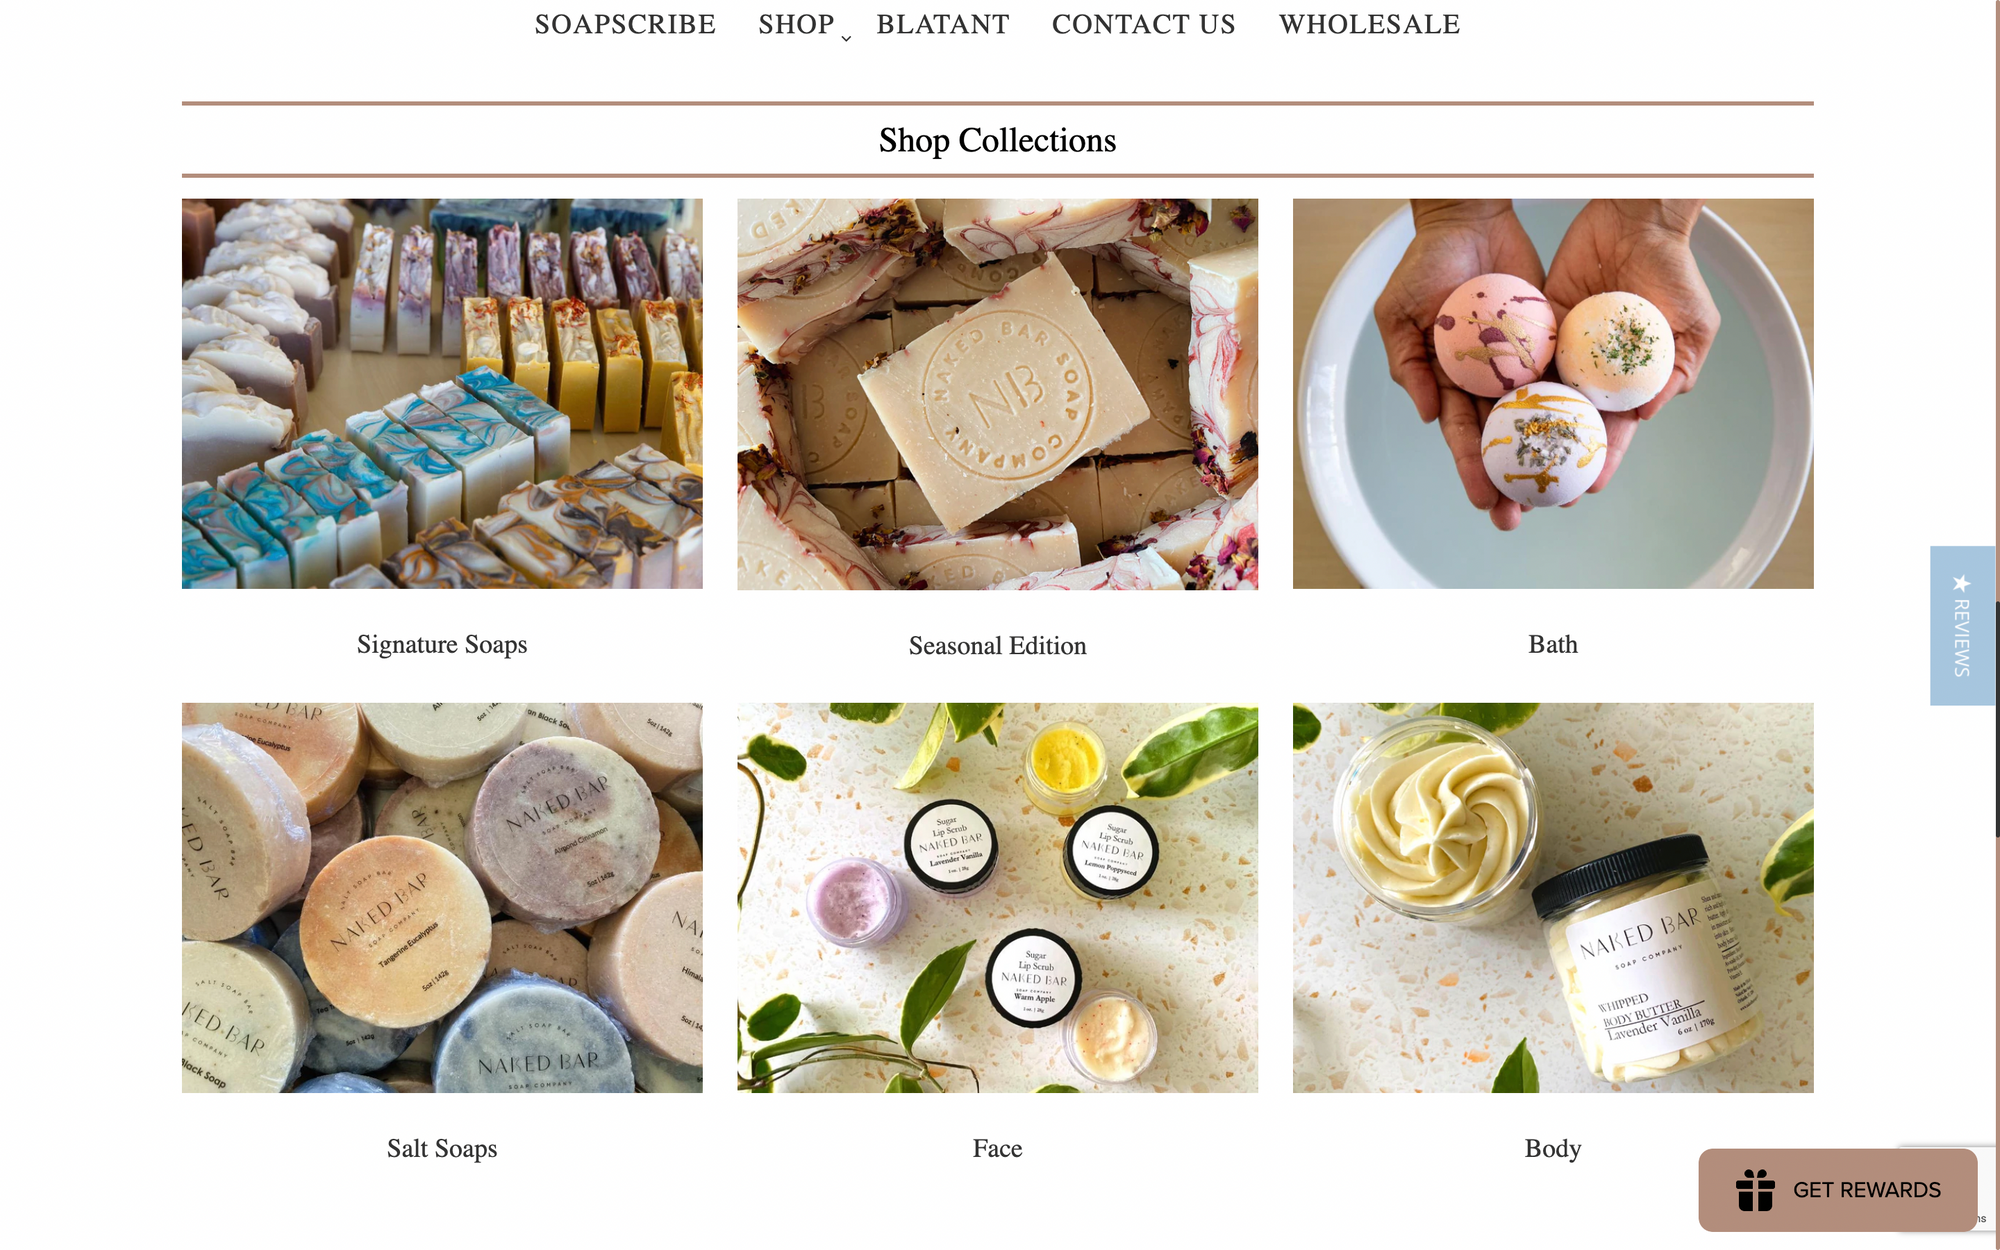 Valentine’s Day Gift Guide–A screenshot from Naked Bar Soap’s homepage. The title is “Shop collection” and there are 6 images of their product collections: Signature Soaps, Seasonal Edition, Bath, Salt Soaps, Face, and Body.